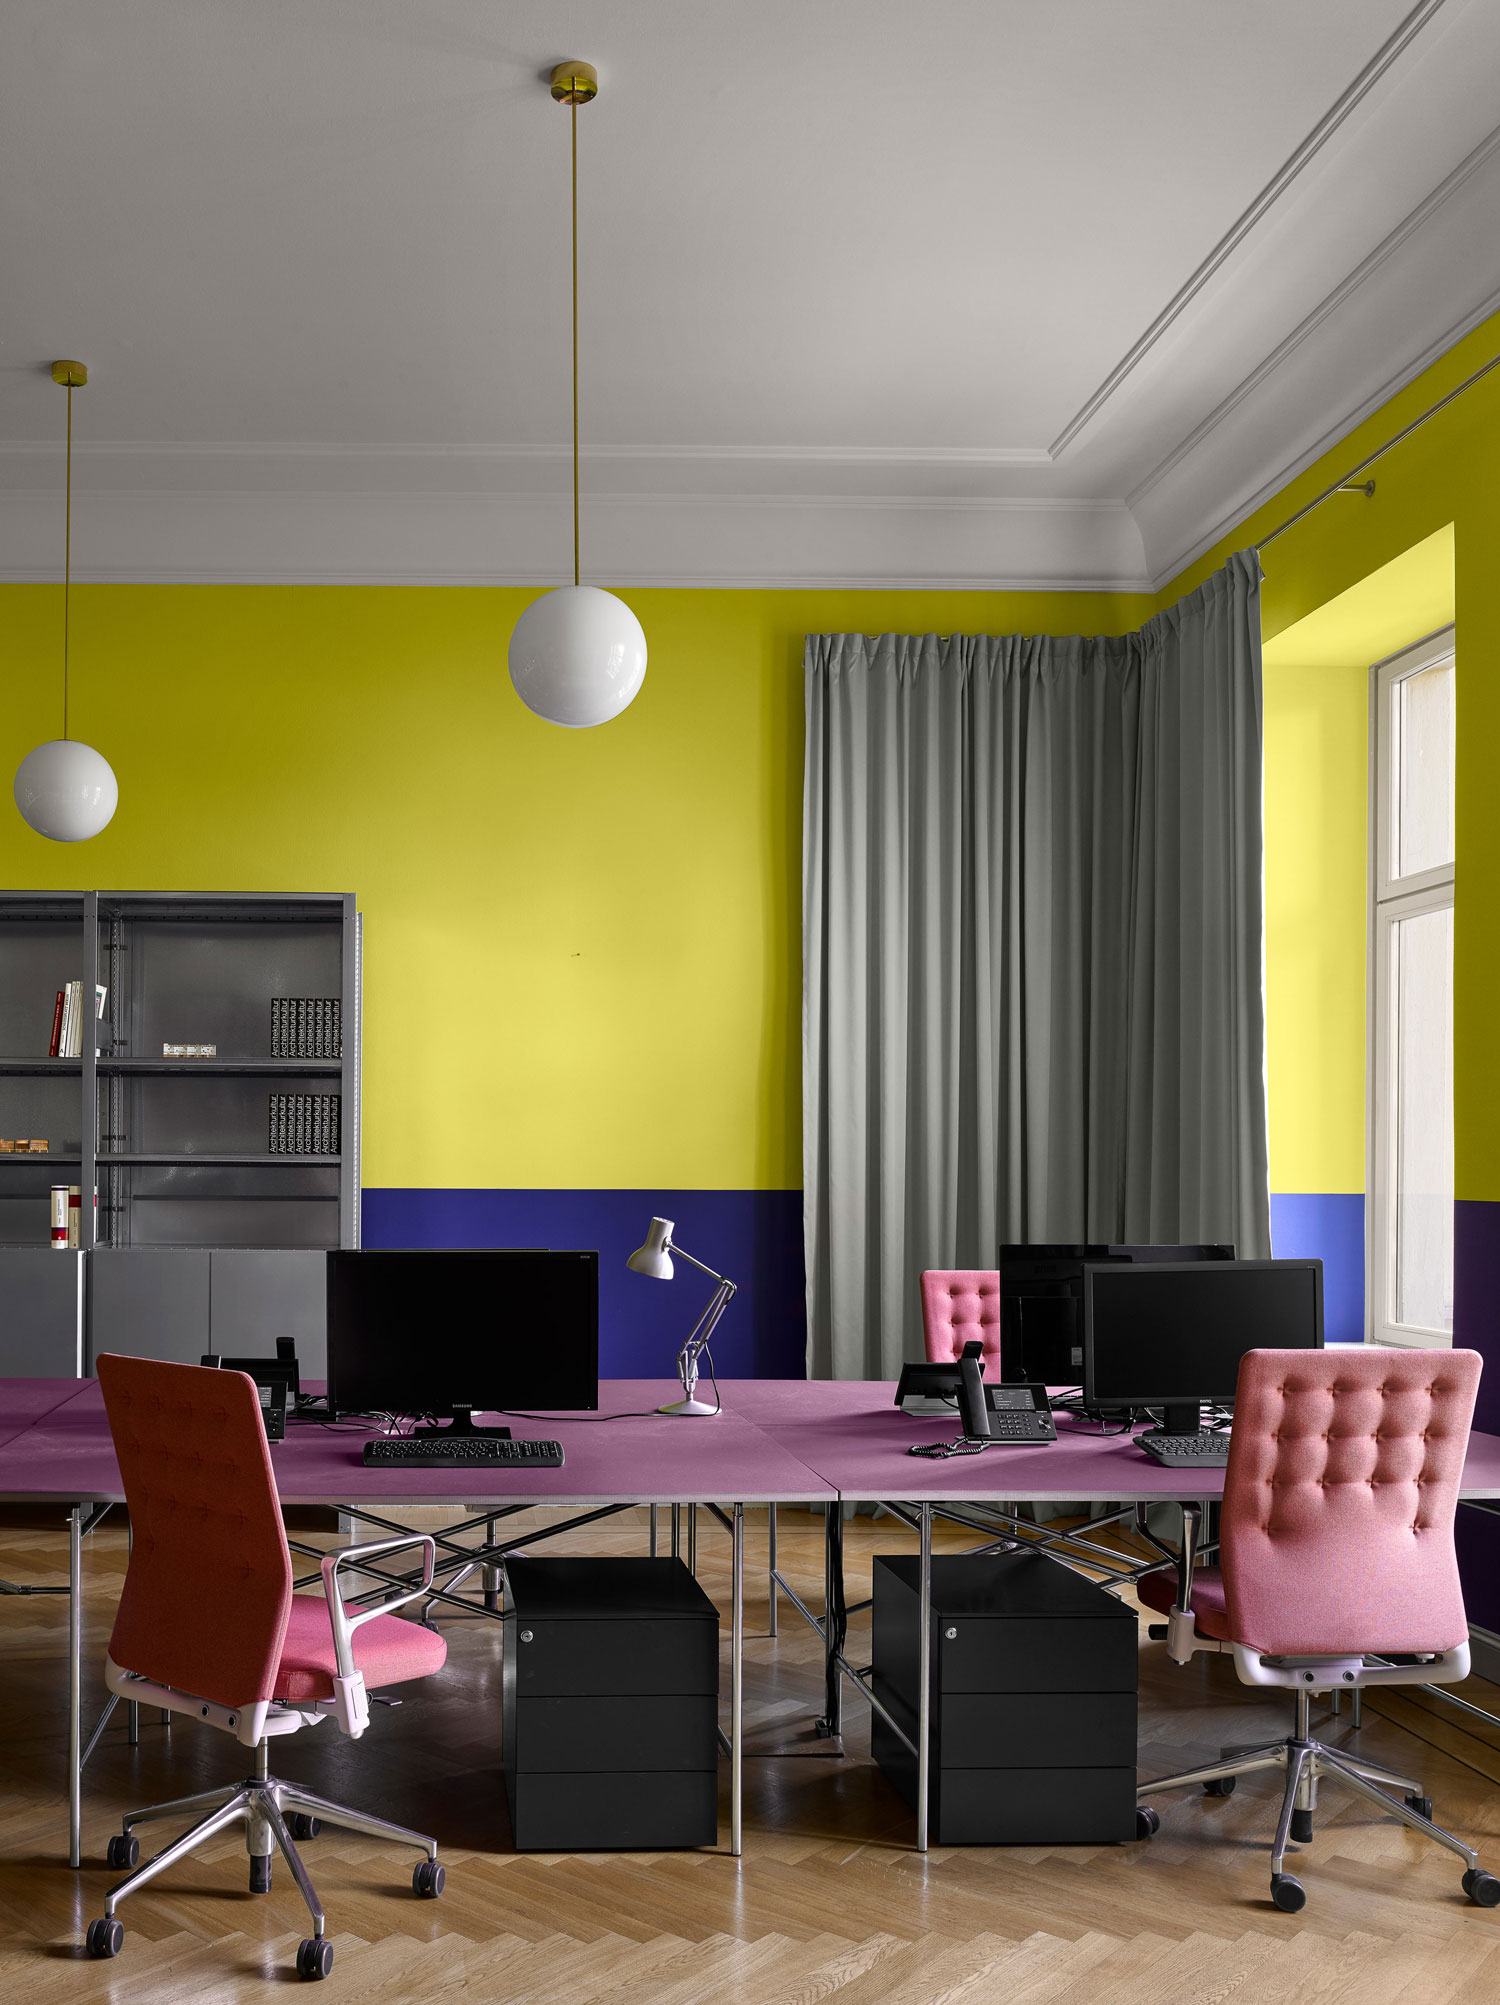 Grand C19th Palais in Berlin Reimagined as an Office by David Kohn Architects.-3